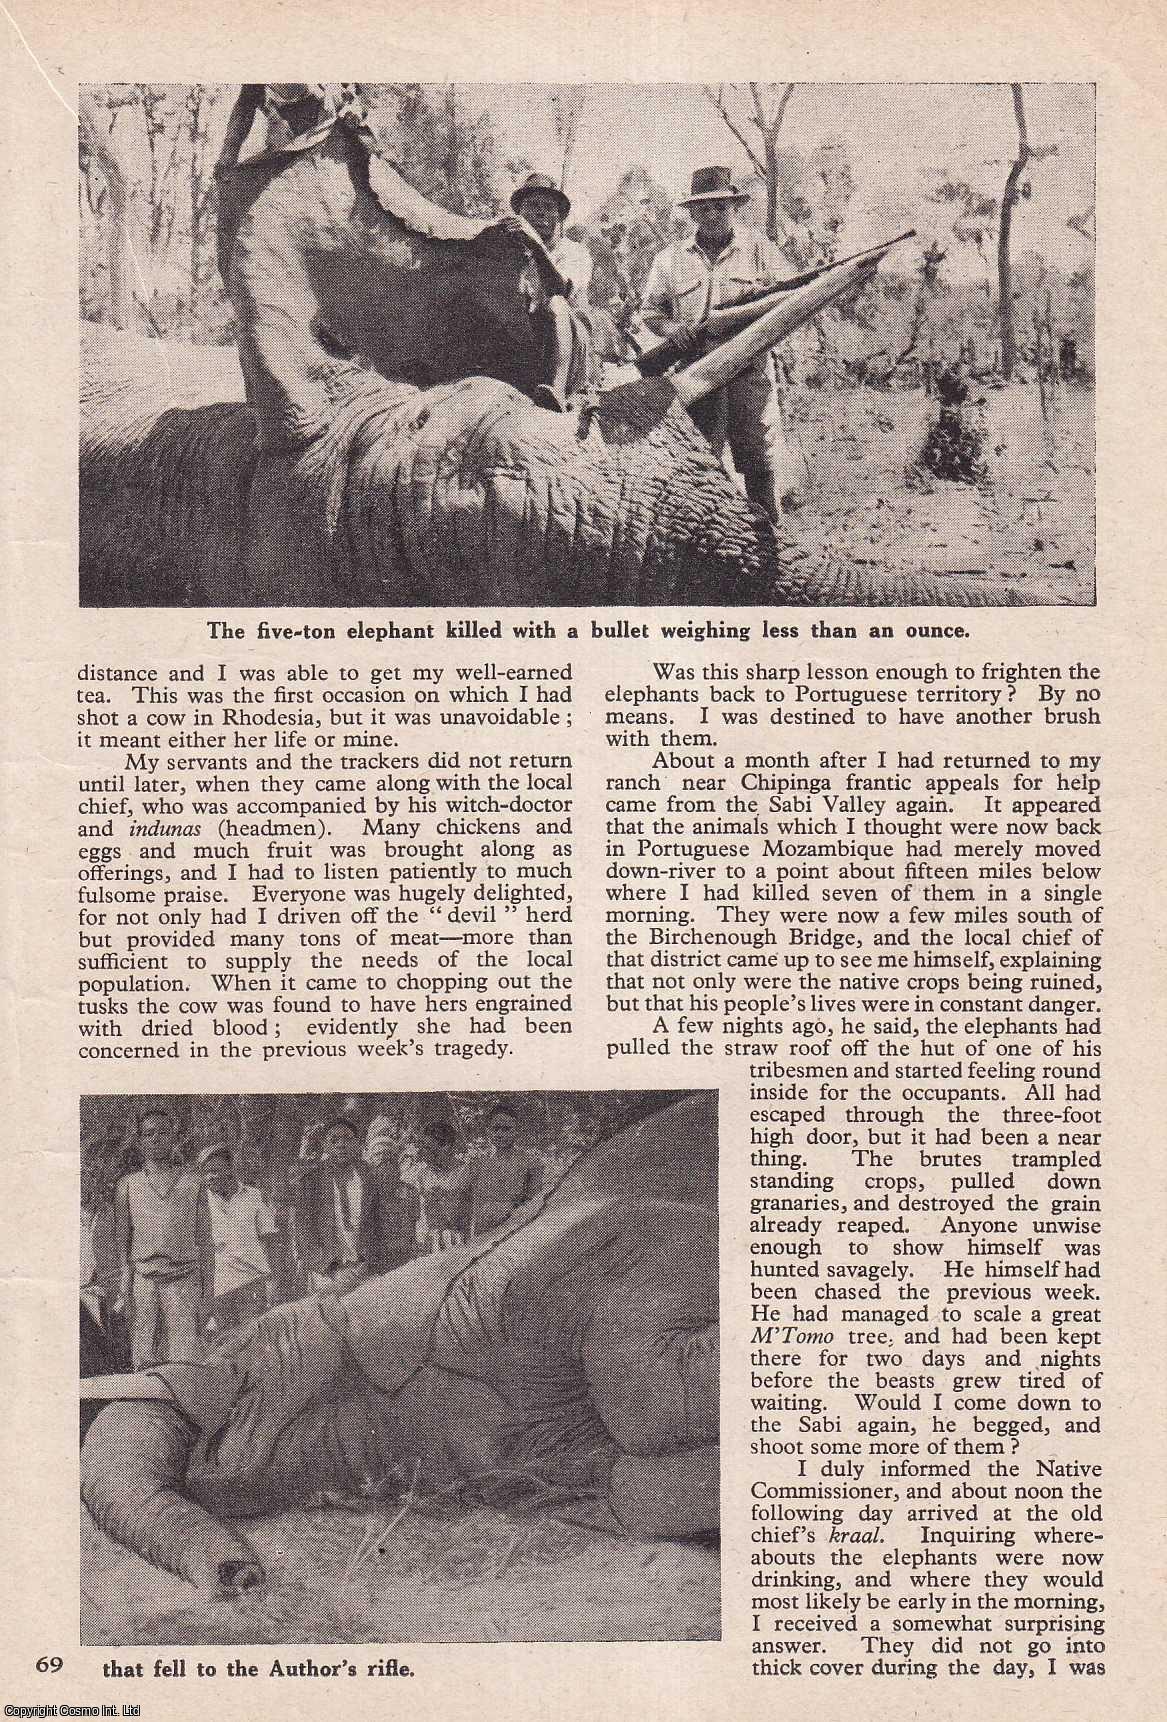 ELEPHANT HUNTING - The Rogue Herd of the Sabi Valley : a Southern Rhodesian elephant herd. By Captain B.B. Celliers, of Chipinga, S. Rhodesia. An uncommon original article from the Wide World Magazine, 1948.